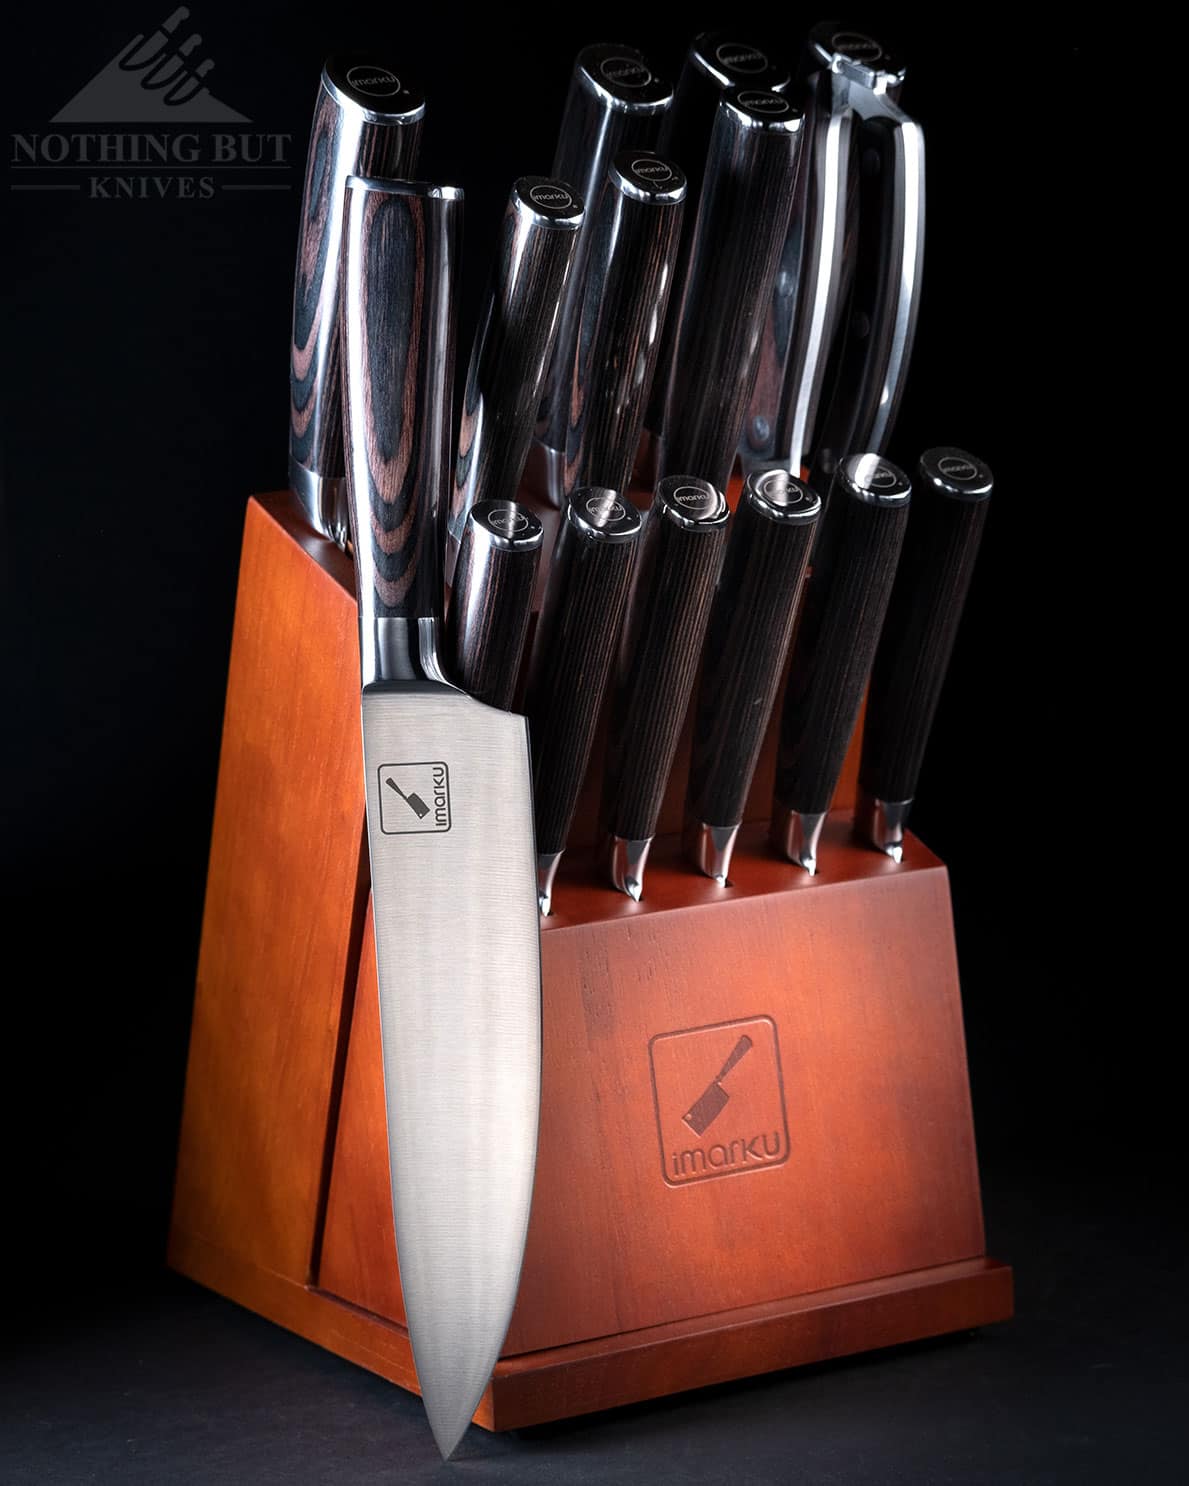 The Imarku 16 Piece Japanese knife set performs above it's price, tag but it has more in common with Western style knife sets than Japanese knives. It is pictured here on a dark background.